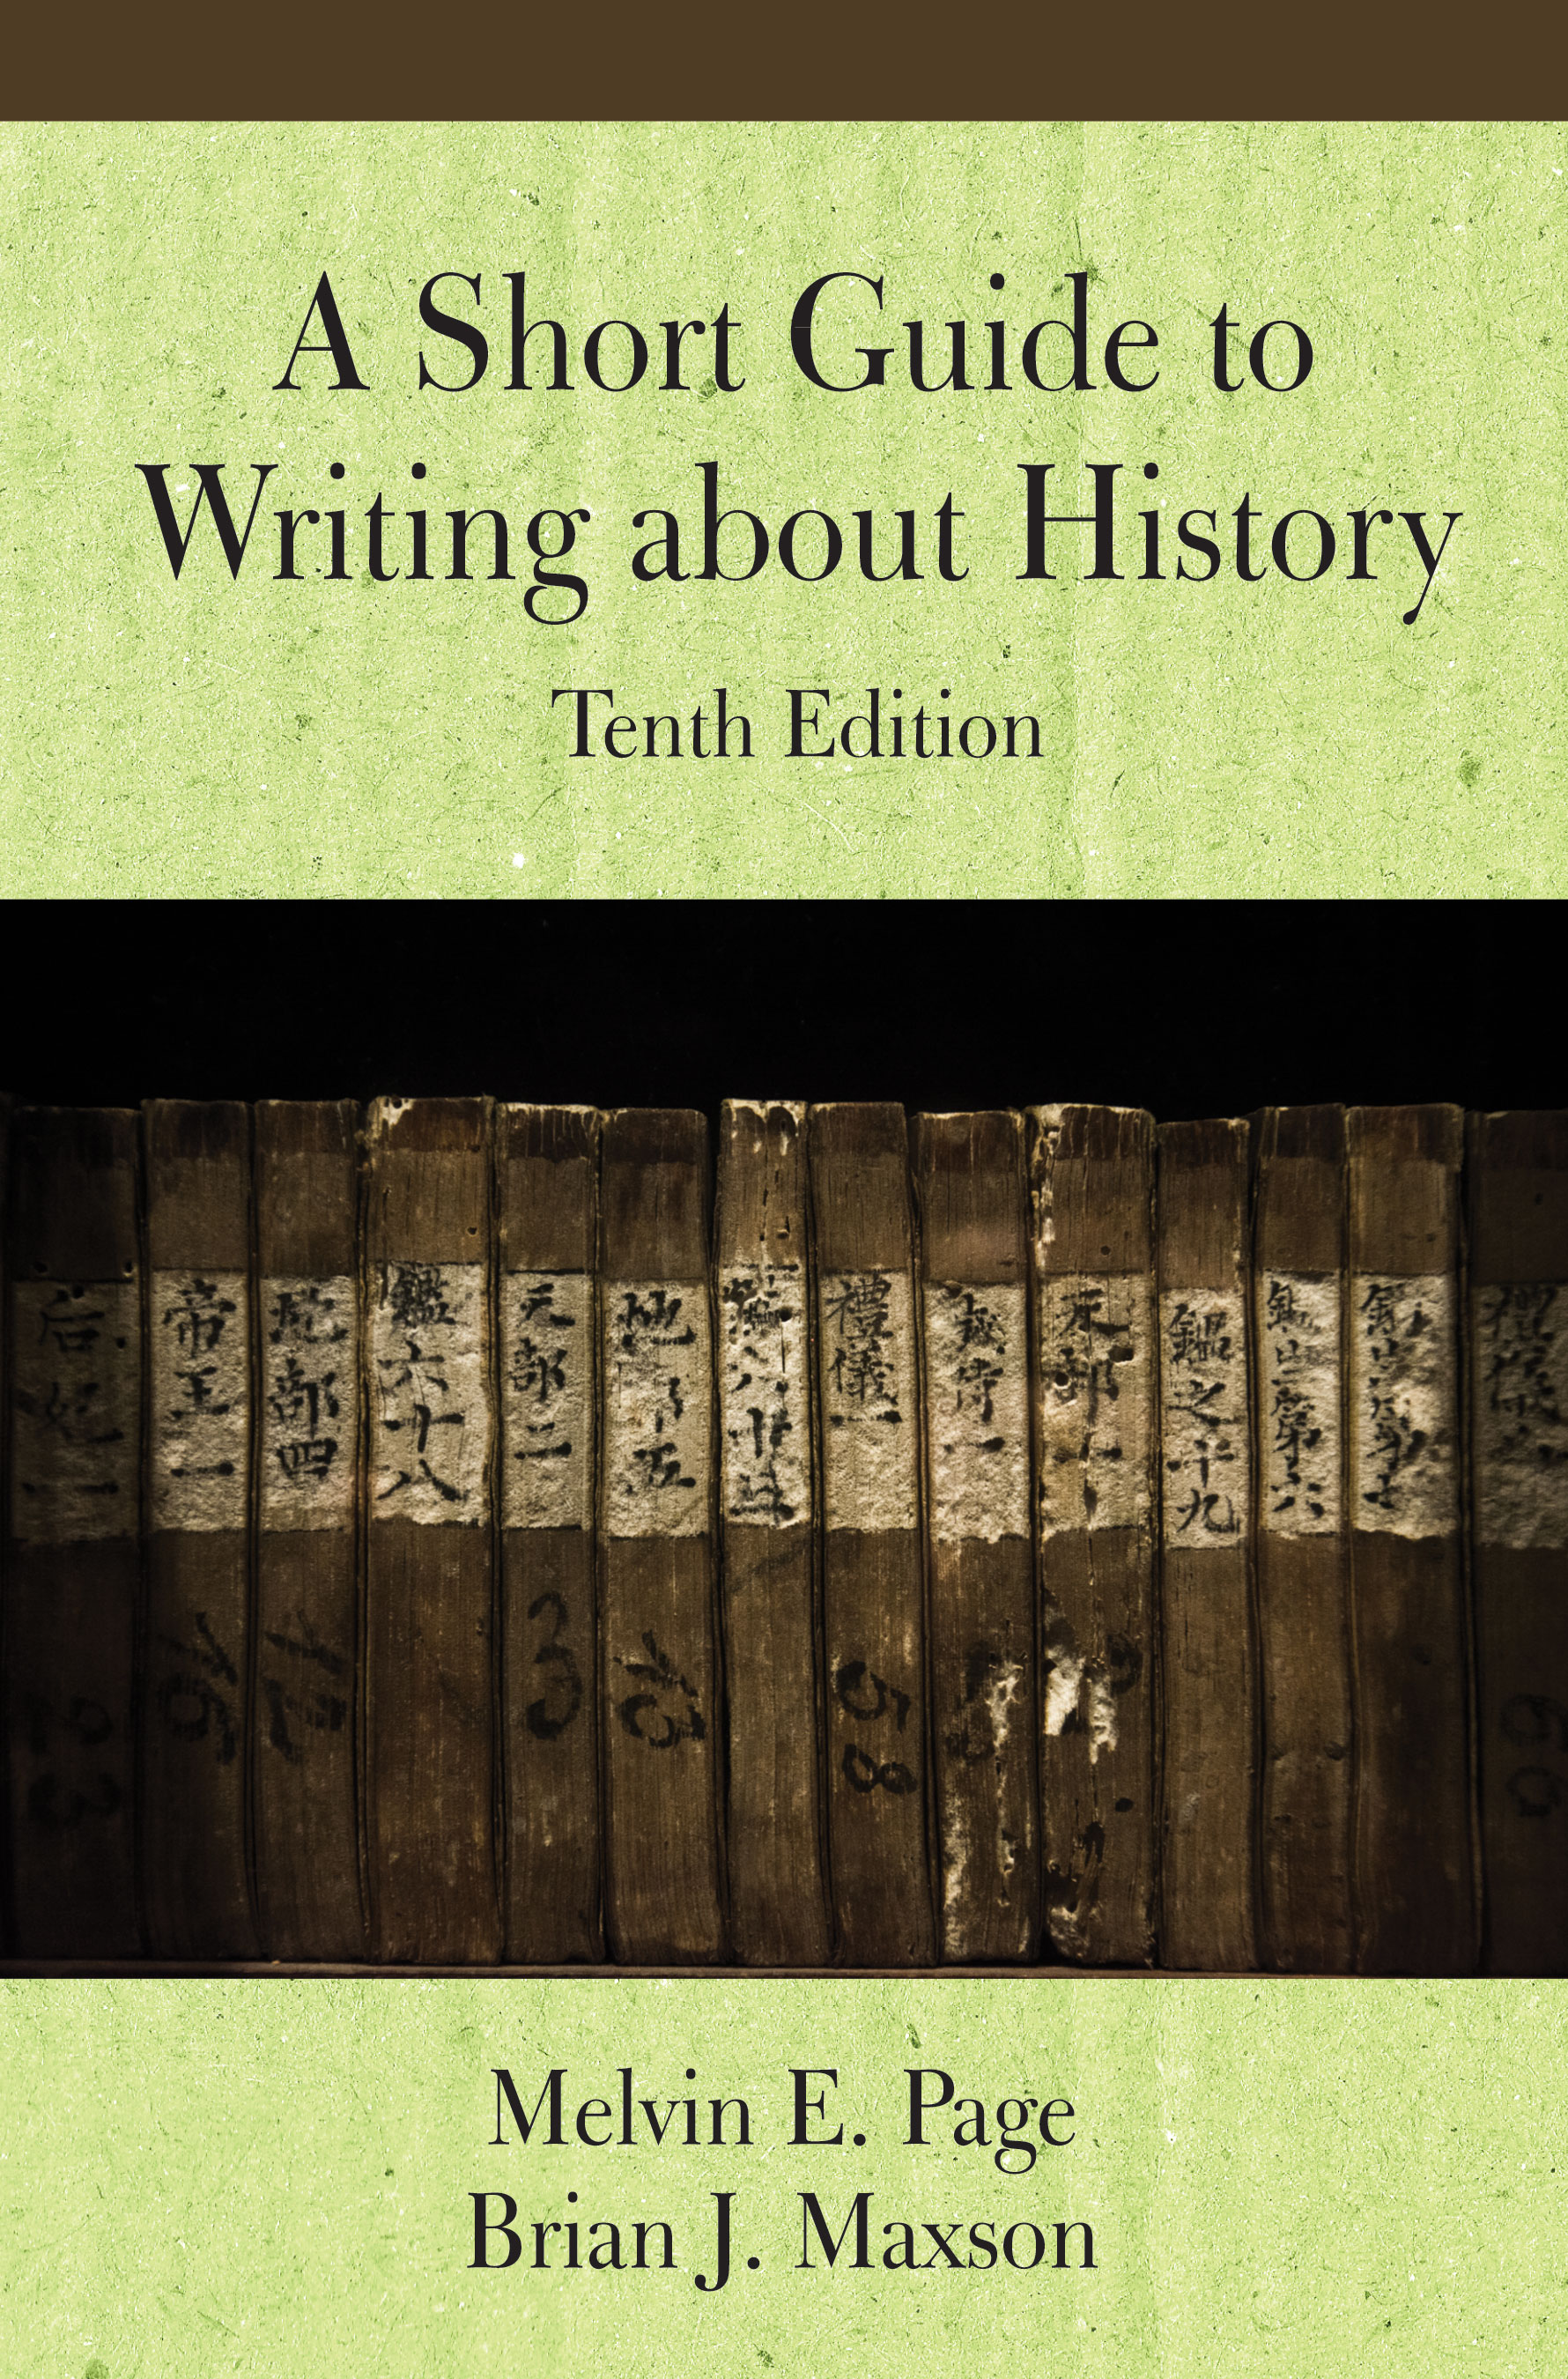 A Short Guide to Writing about History: Tenth Edition by Melvin E. Page, Brian J. Maxson